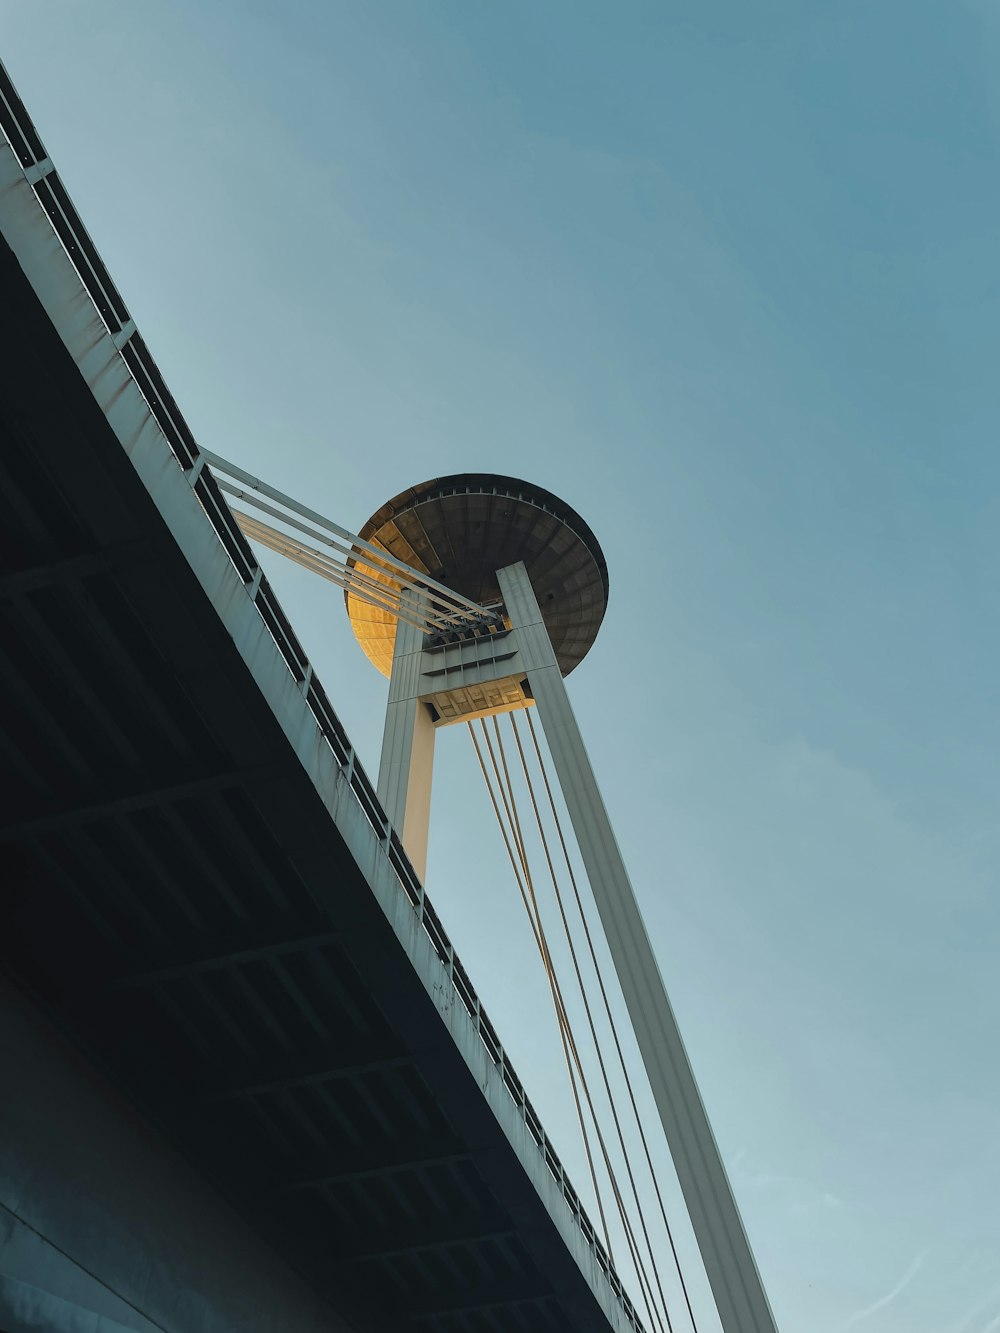 a view of a bridge with a water tower in the background